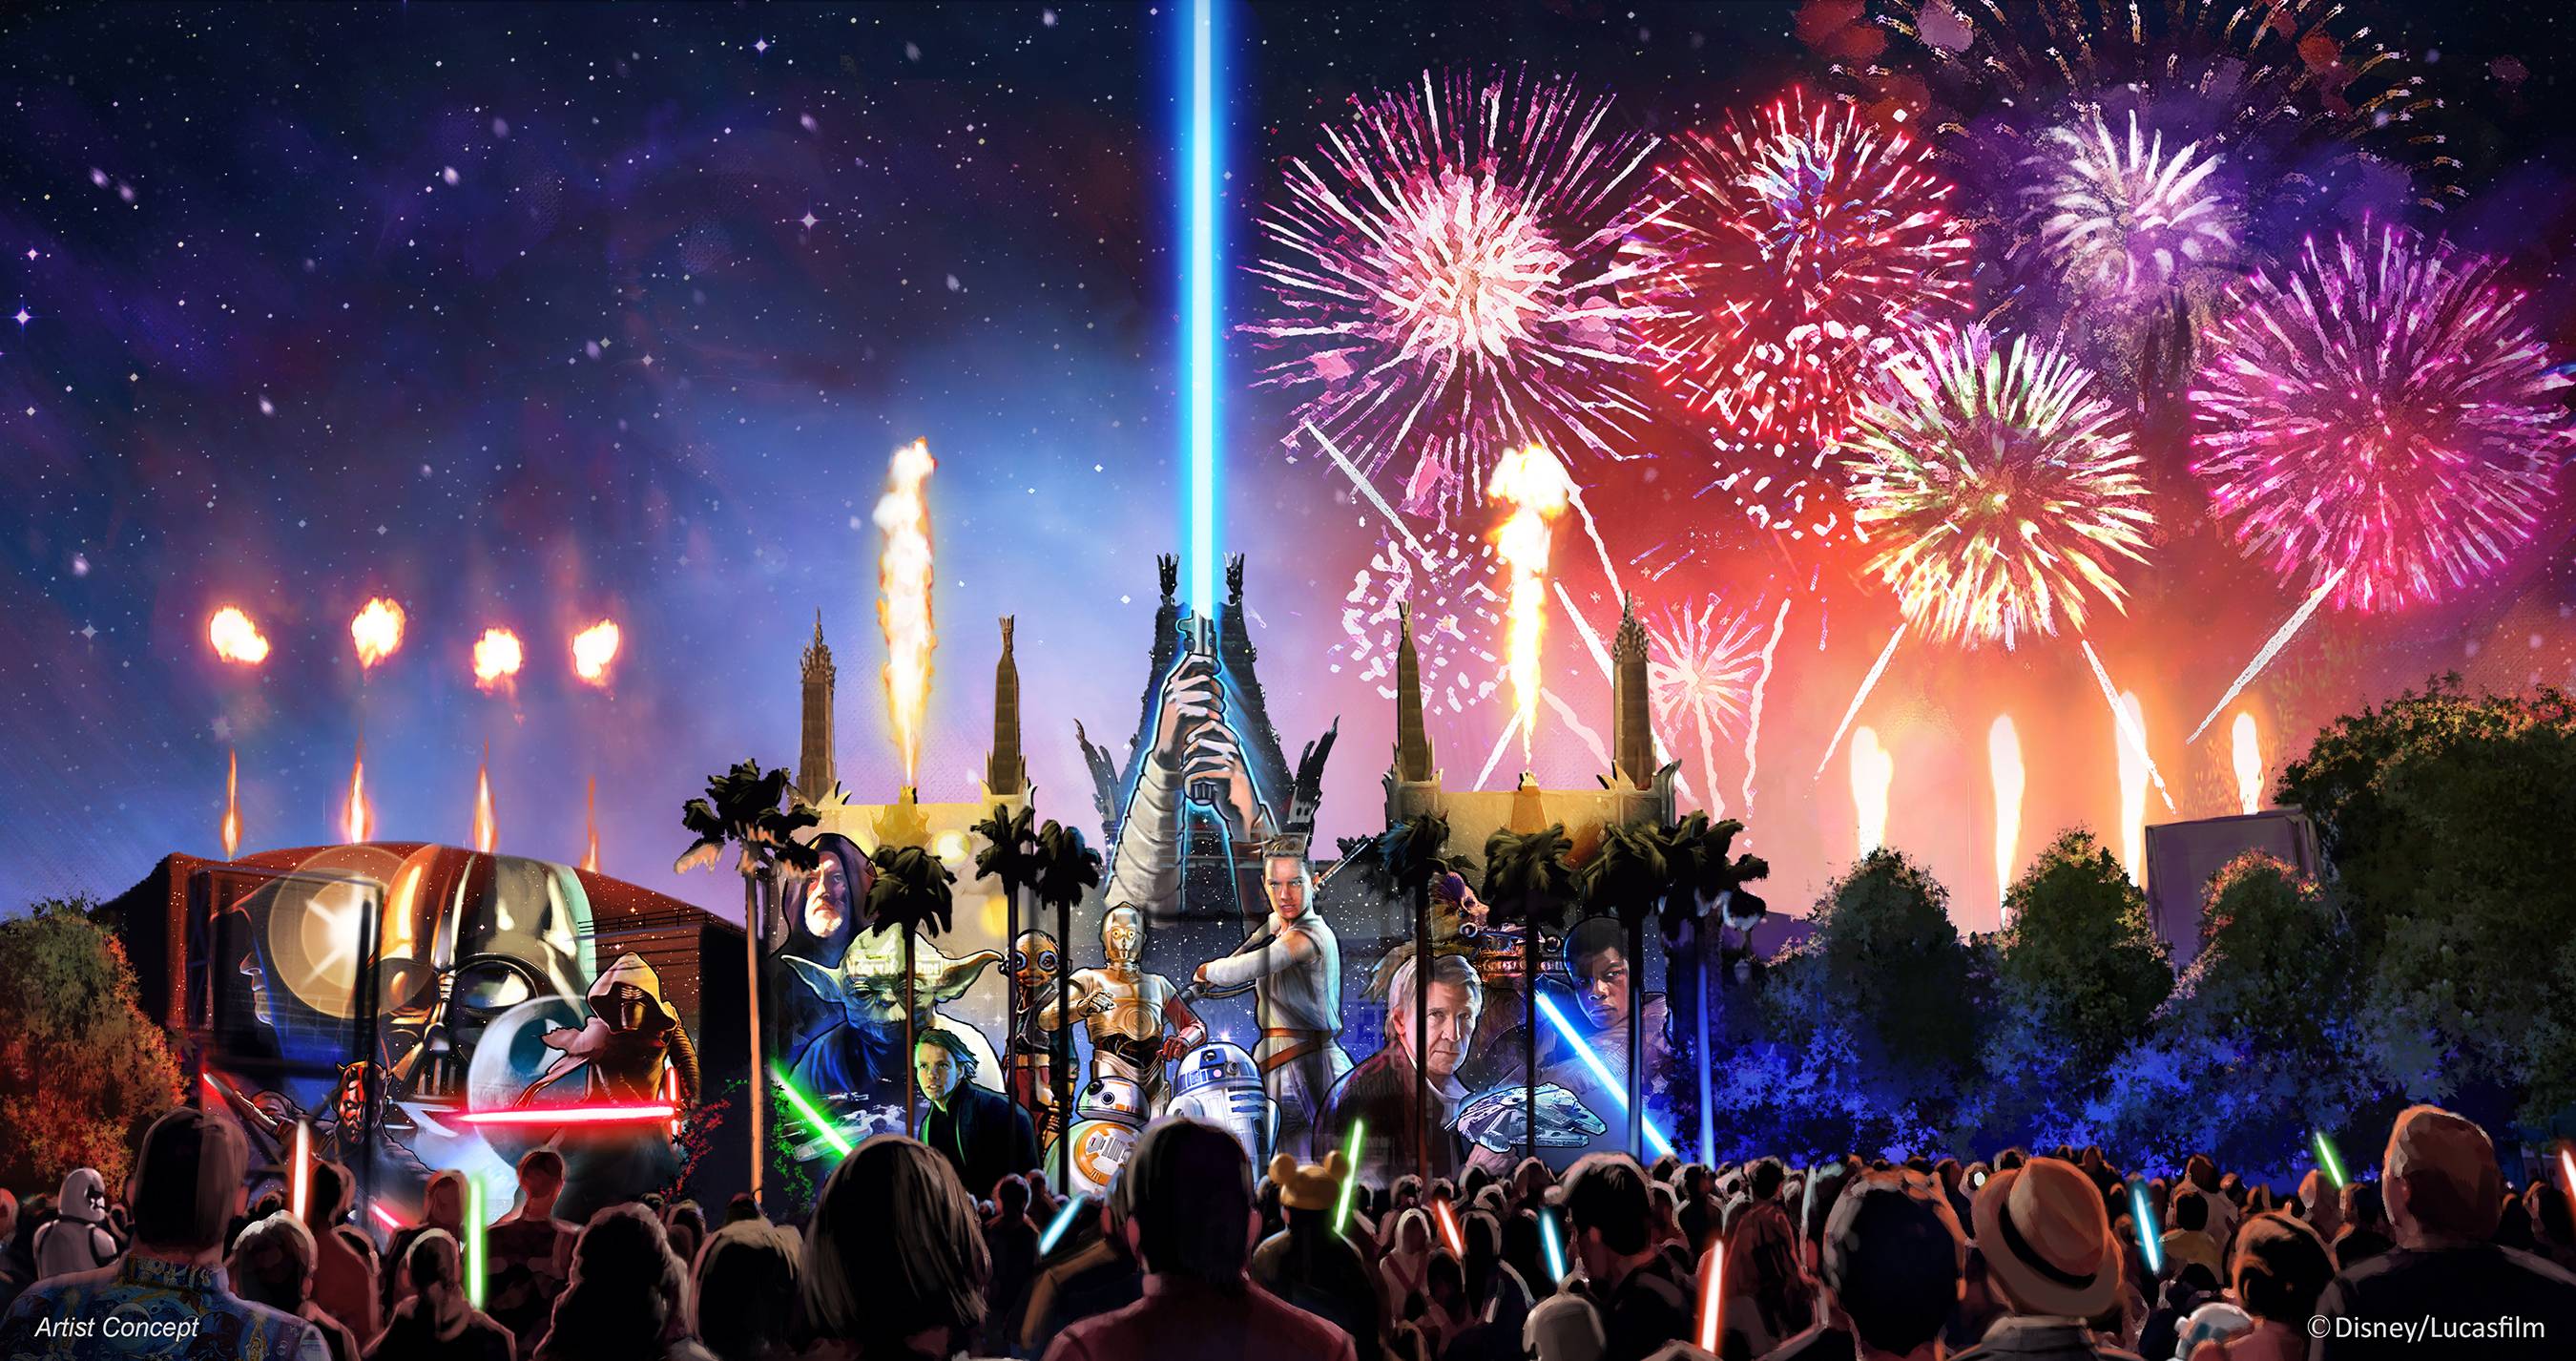 'Star Wars: A Galactic Spectacular' dessert party moving to Star Wars Launch Bay